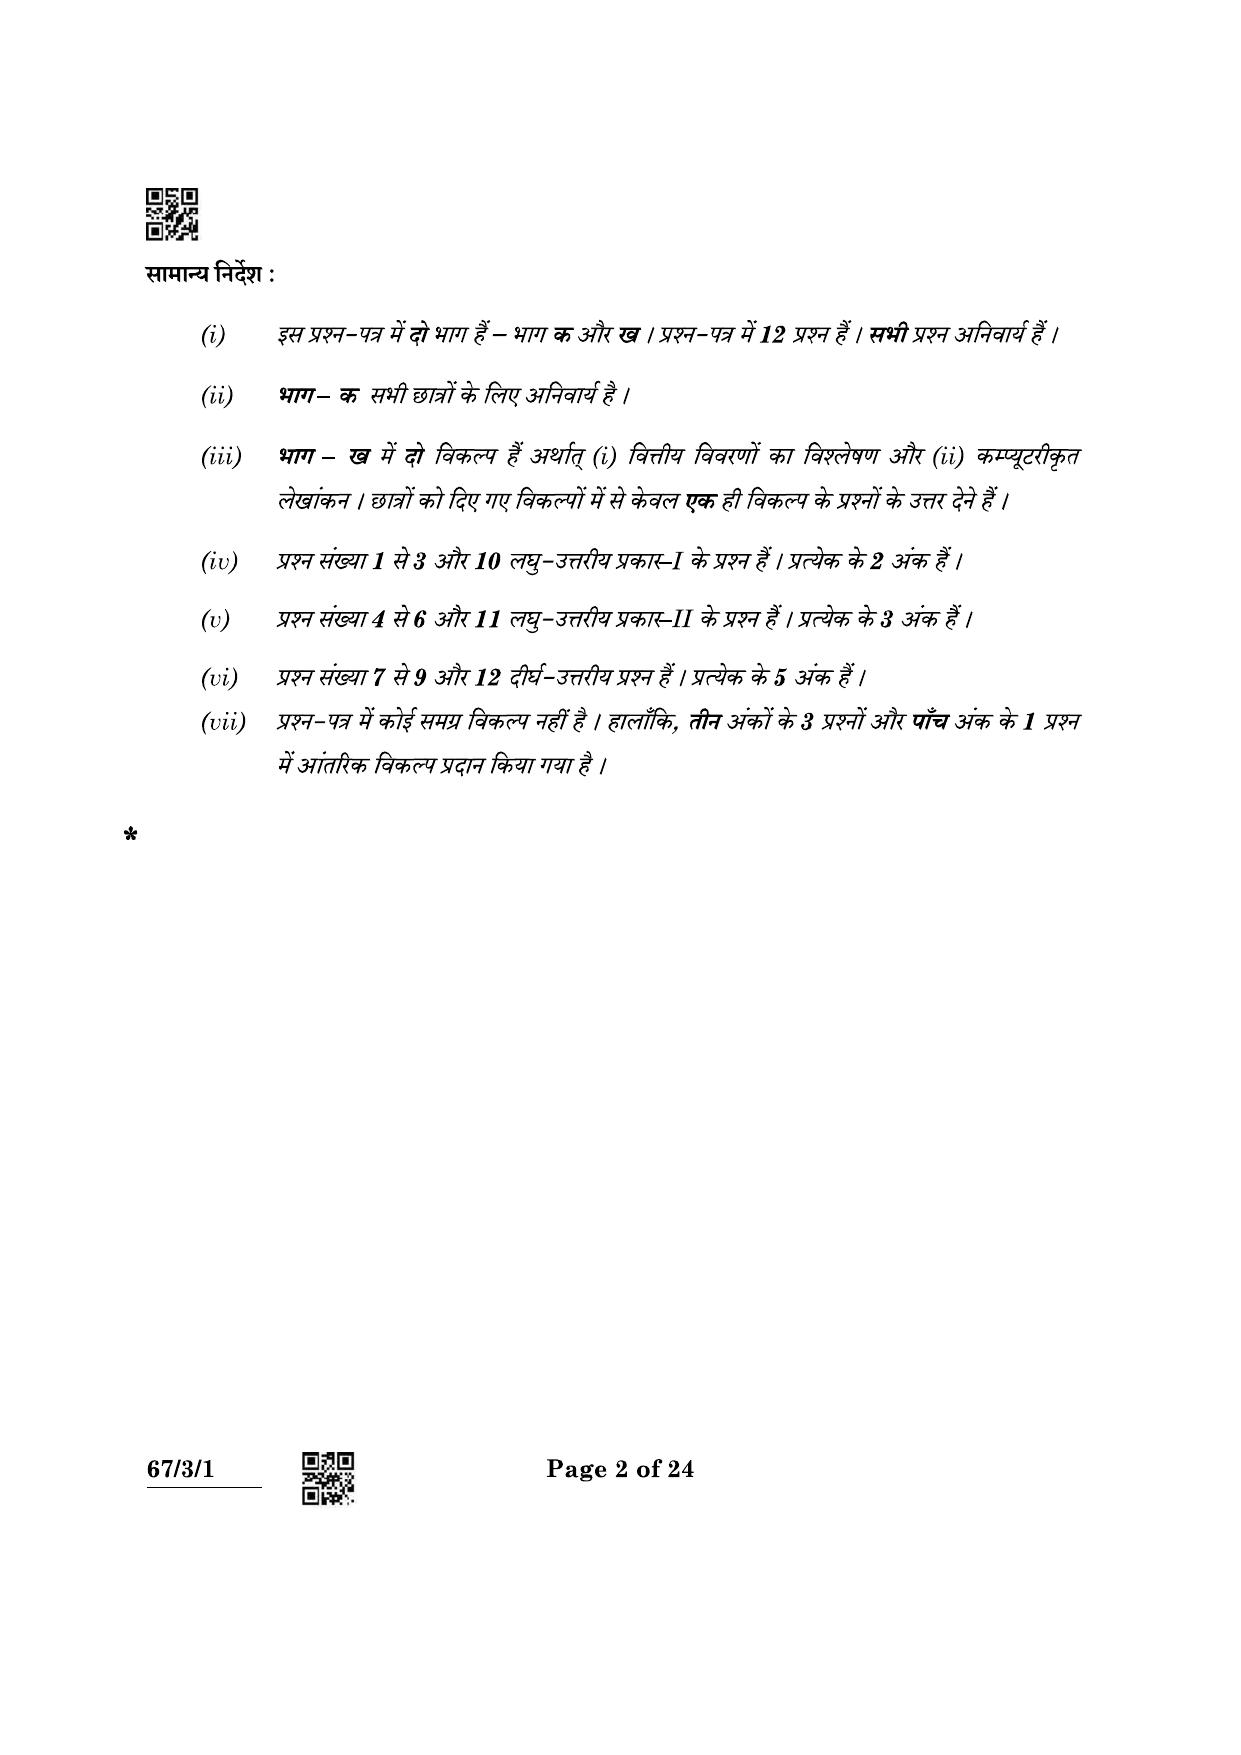 CBSE Class 12 67-3-1 Accountancy 2022 Question Paper - Page 2